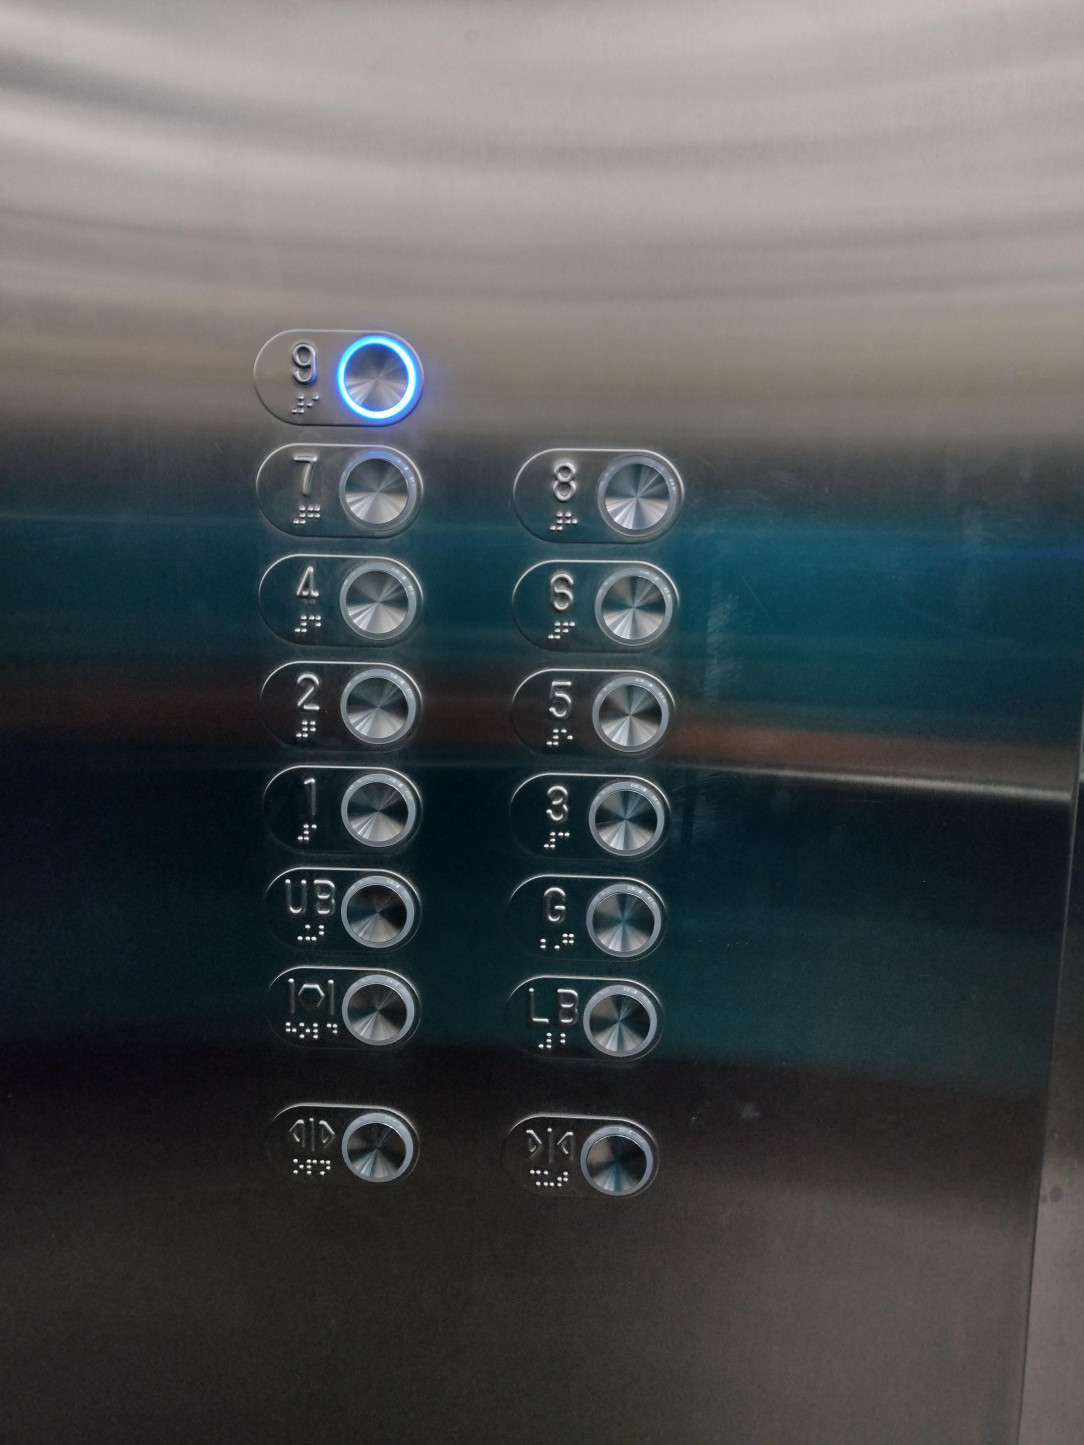 The man who configured the sequence for this elevator button